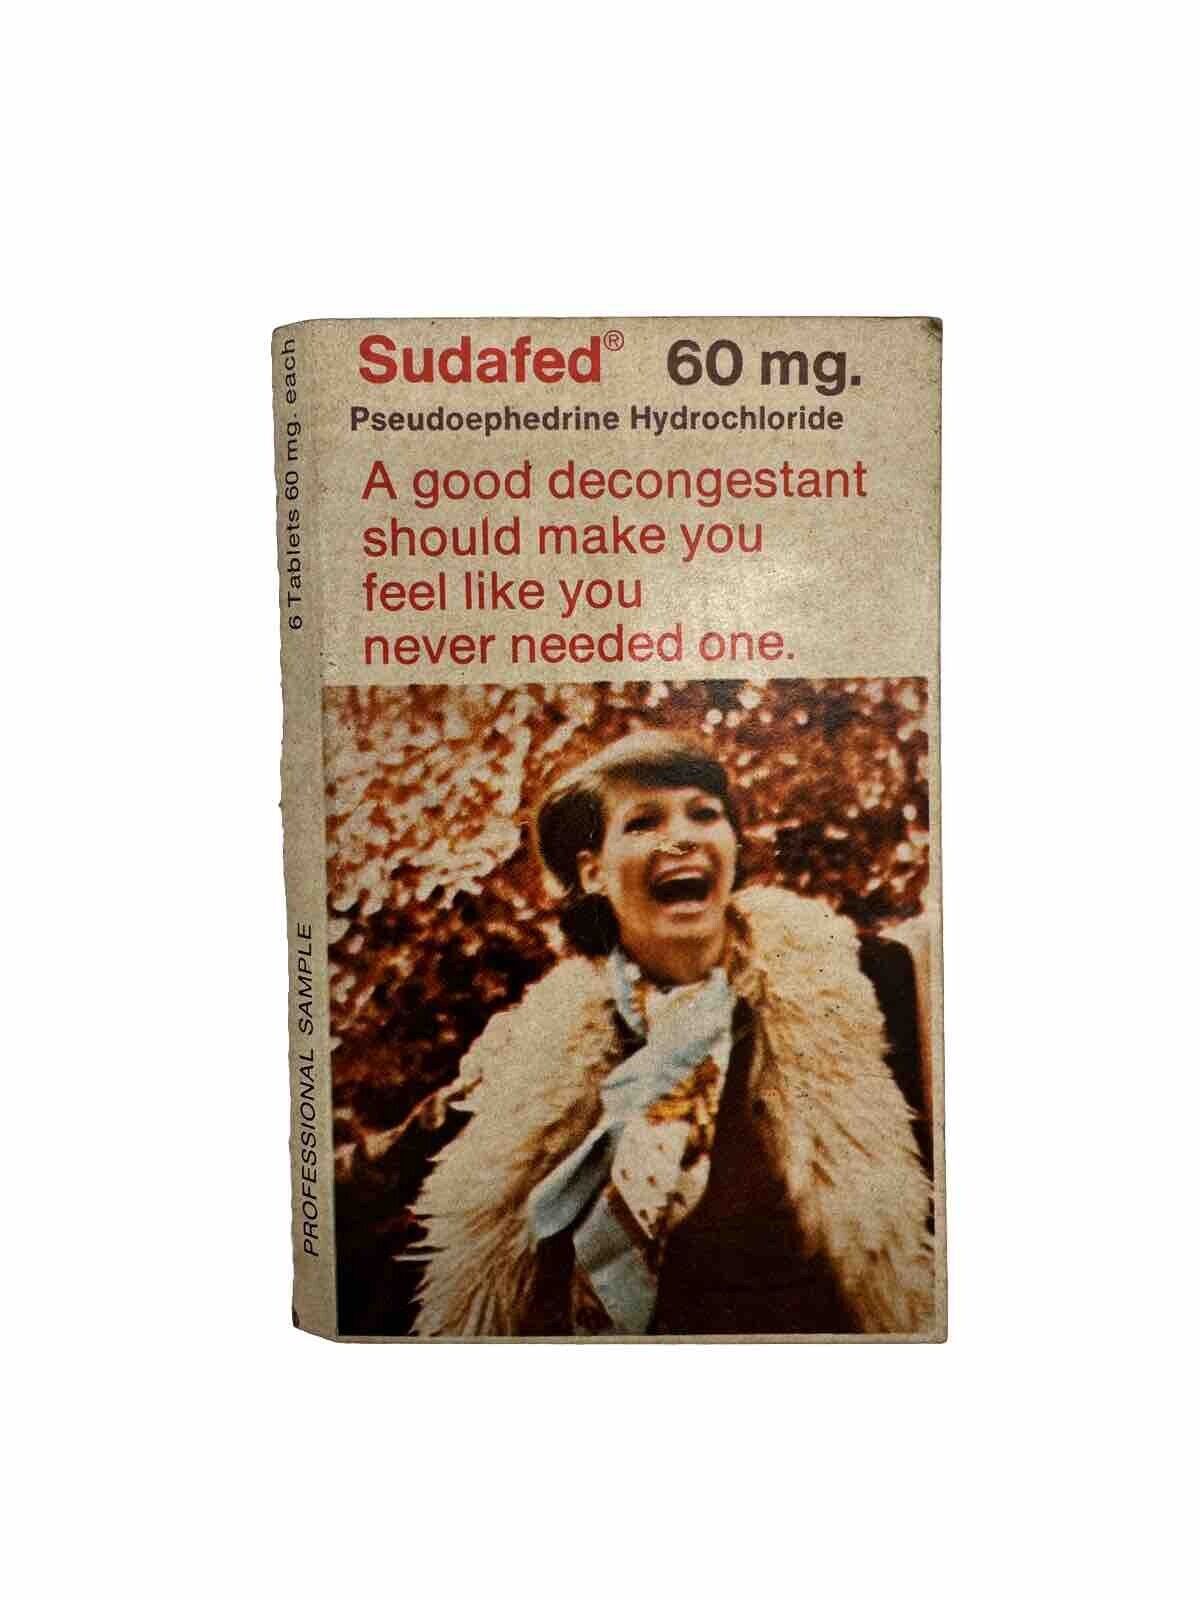 Burroughs Wellcome Co - Vintage Sudafed 60mg Sample Pack - Circa 1950-1960s